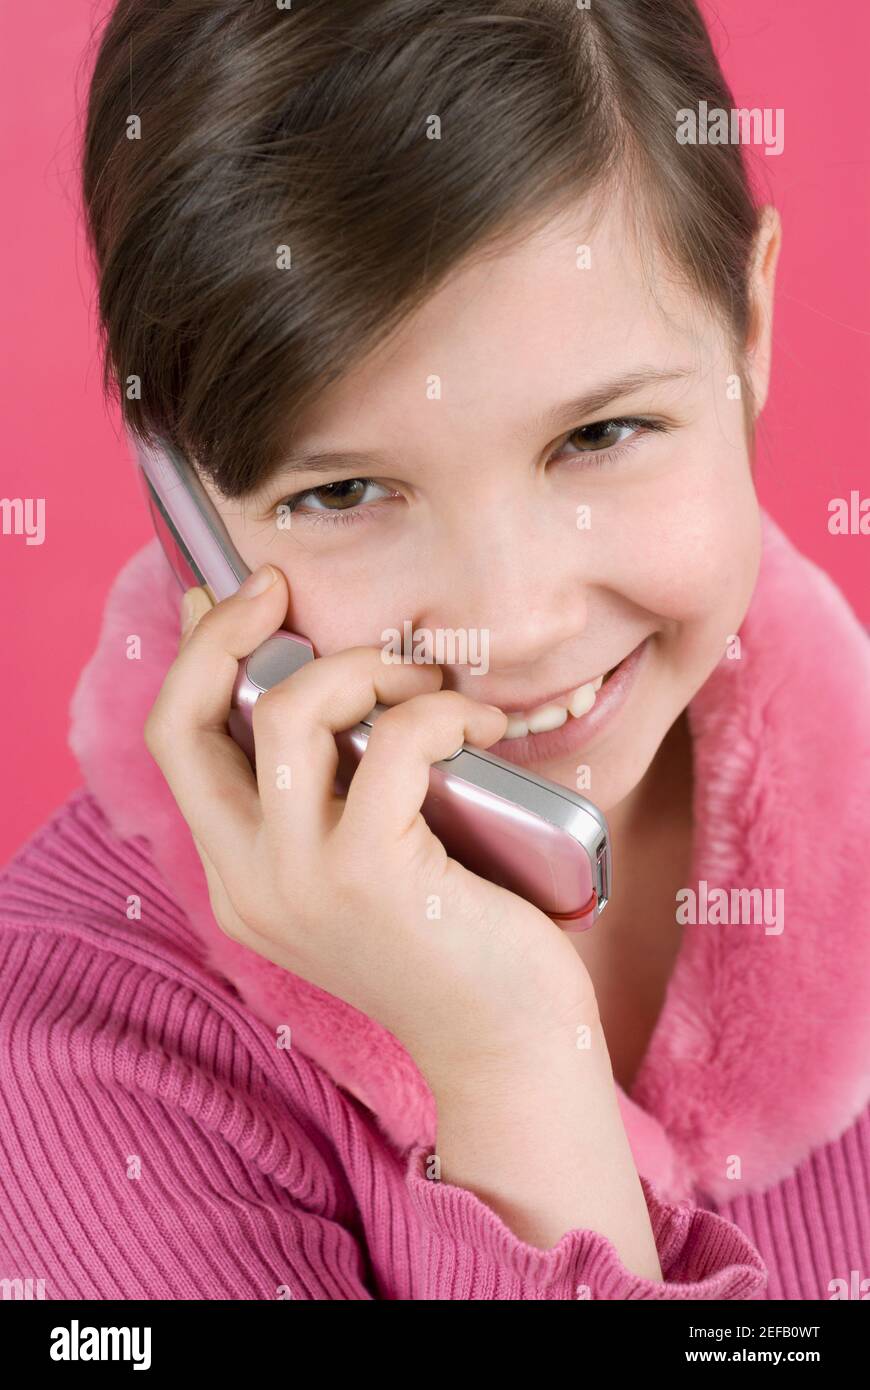 High angle view of a girl talking on a mobile phone Stock Photo